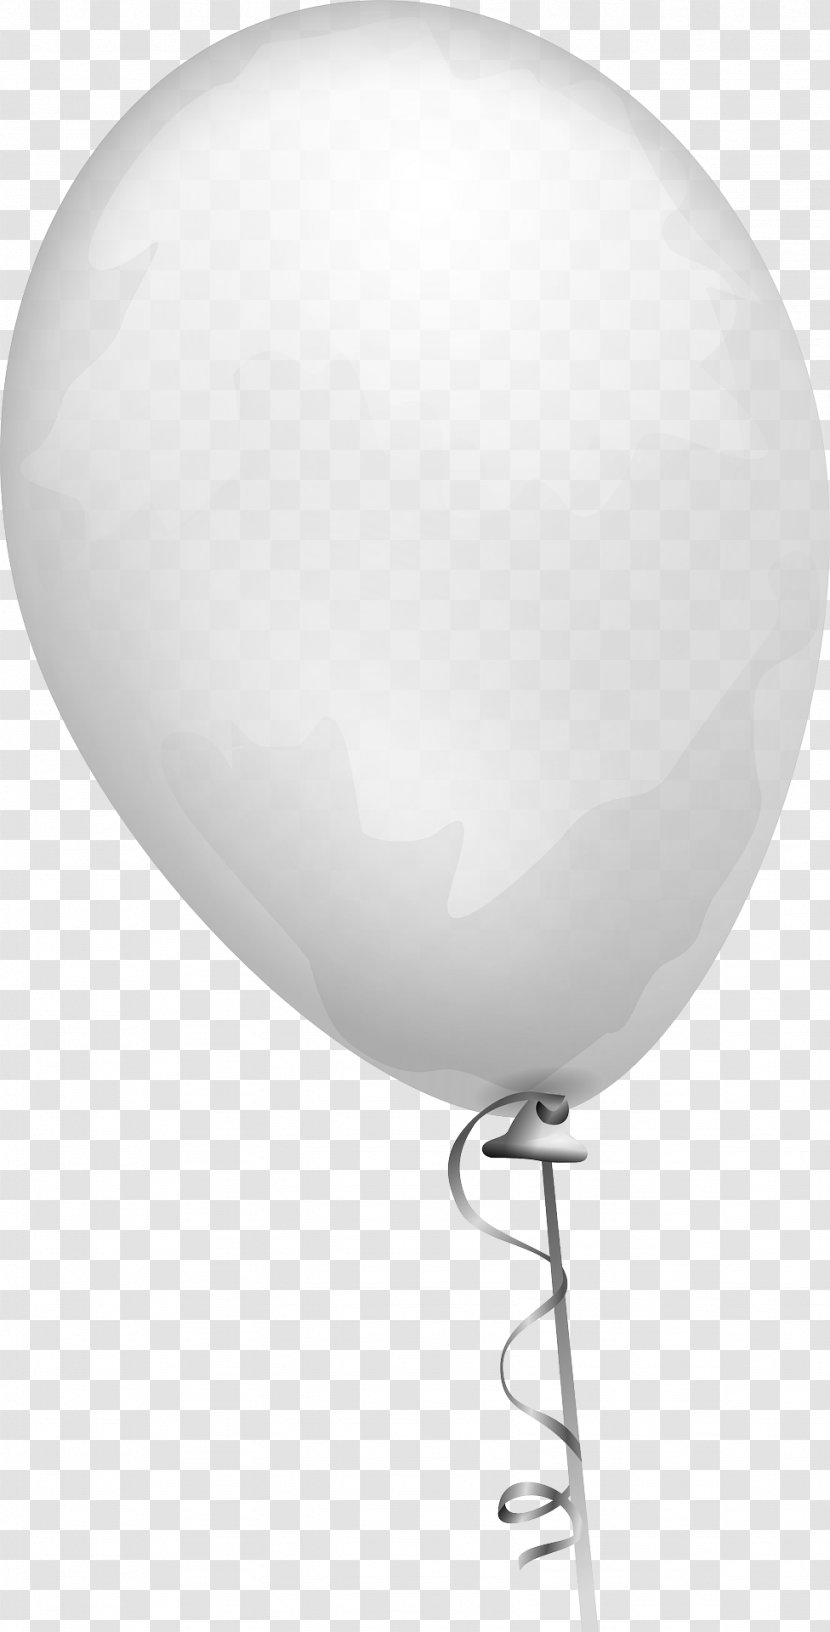 White Party Balloon Clip Art - Sphere - Watercolor Transparent PNG